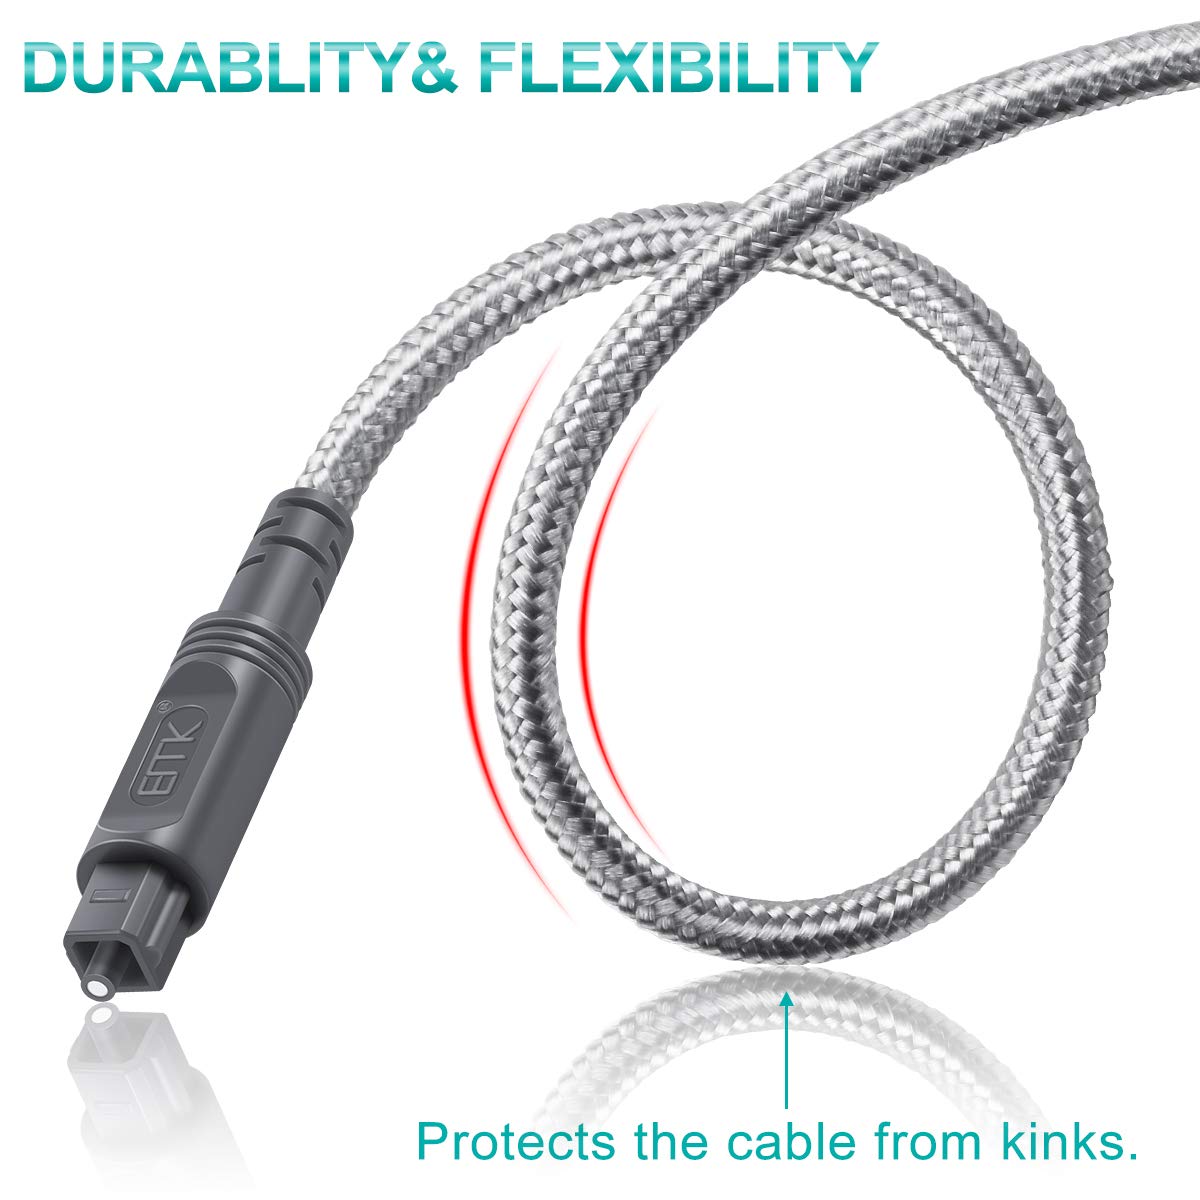 Digital Optical Audio Cable Toslink Cable - [Cotton Braided Jacket,Durable and Flexible]EMK Fiber Optic Cord for Home Theater, Sound bar, TV, PS4, Xbox & More (10Ft/3M)